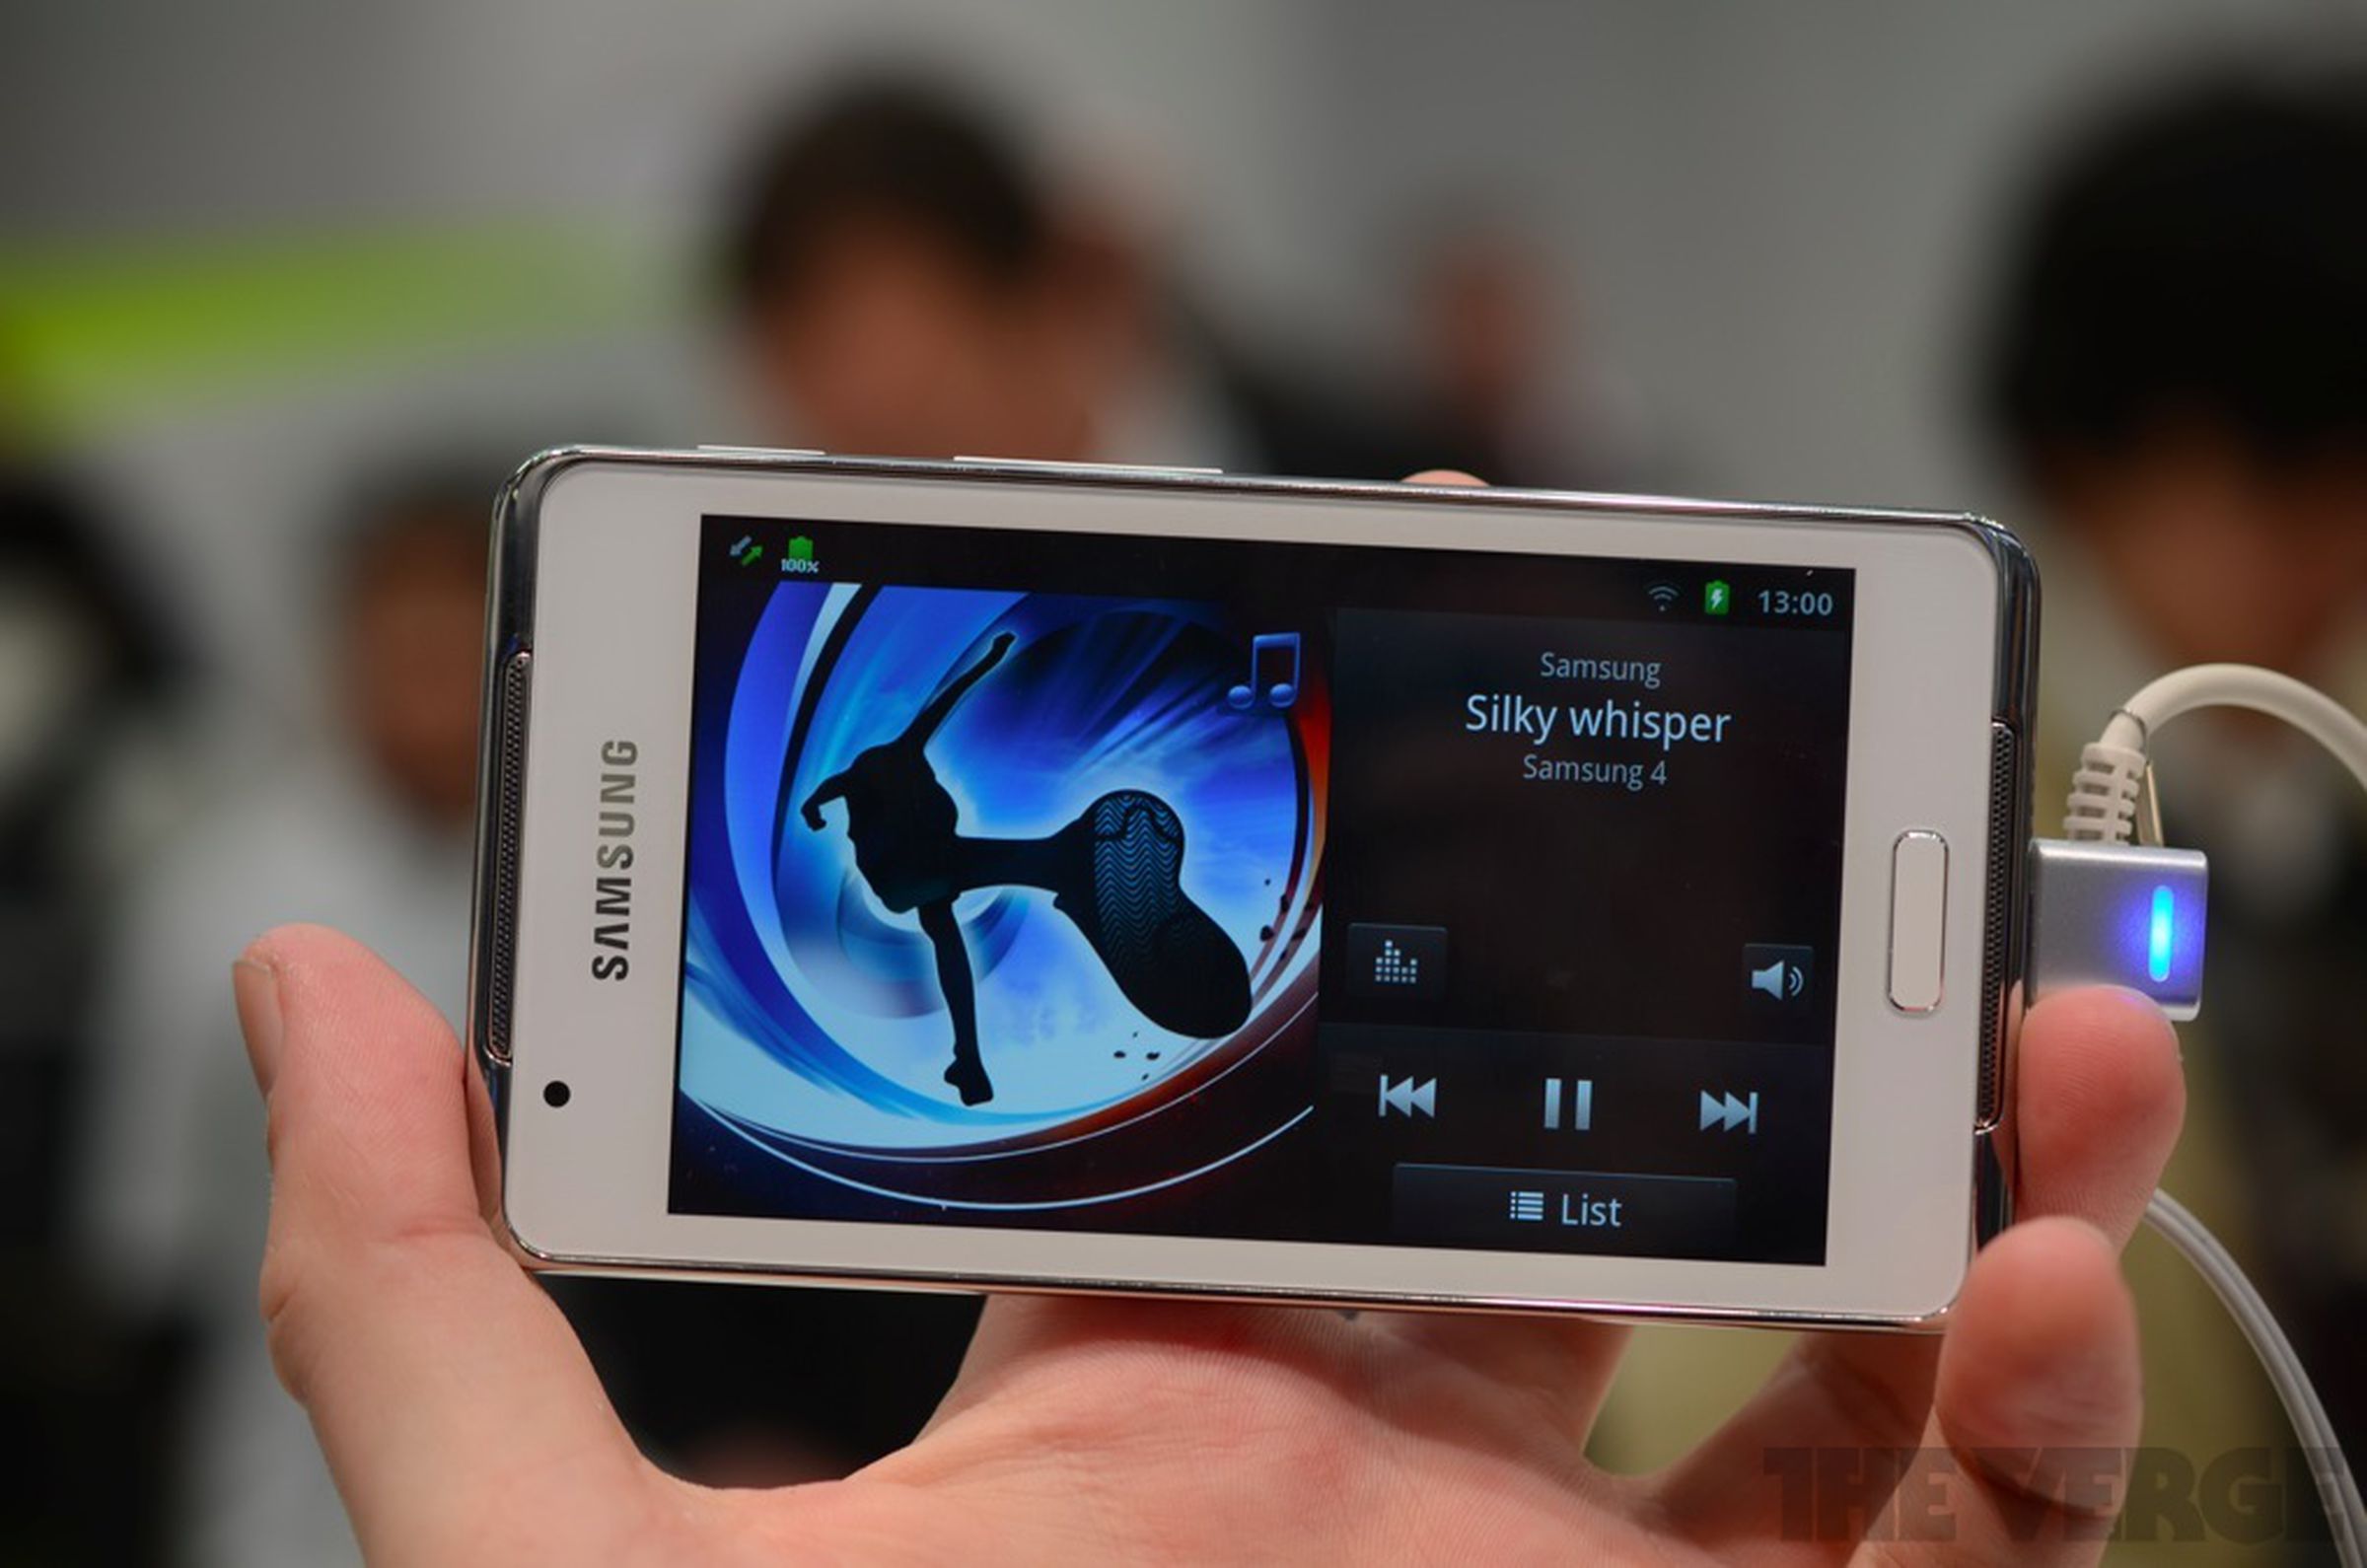 Samsung Galaxy S WiFi 4.2 hands-on pictures